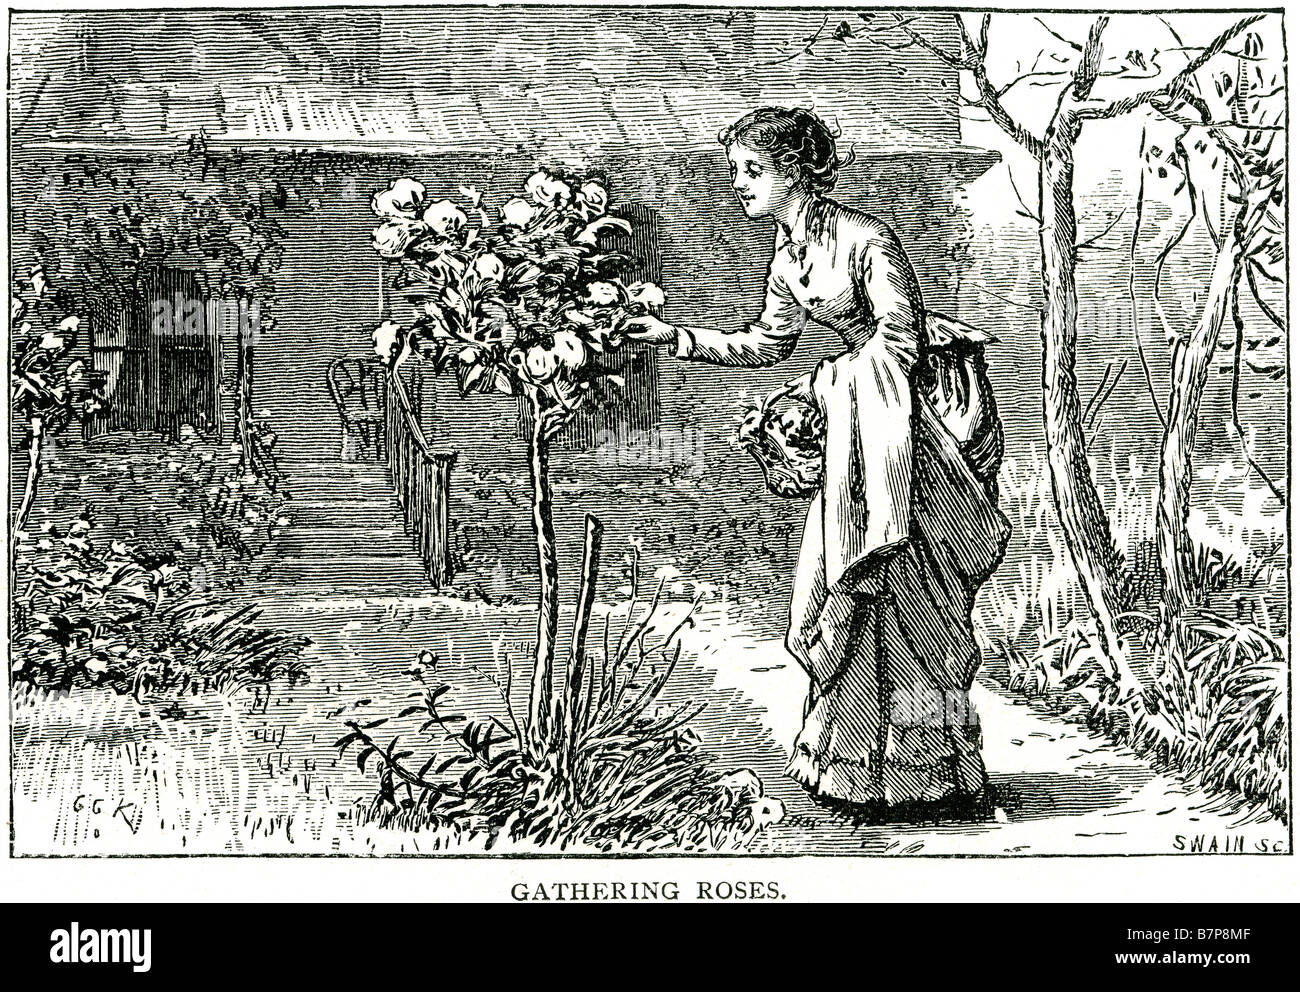 Gathering Roses rose bush garden lady picking flowers traditional clothing house decking park path flower summer outside Stock Photo